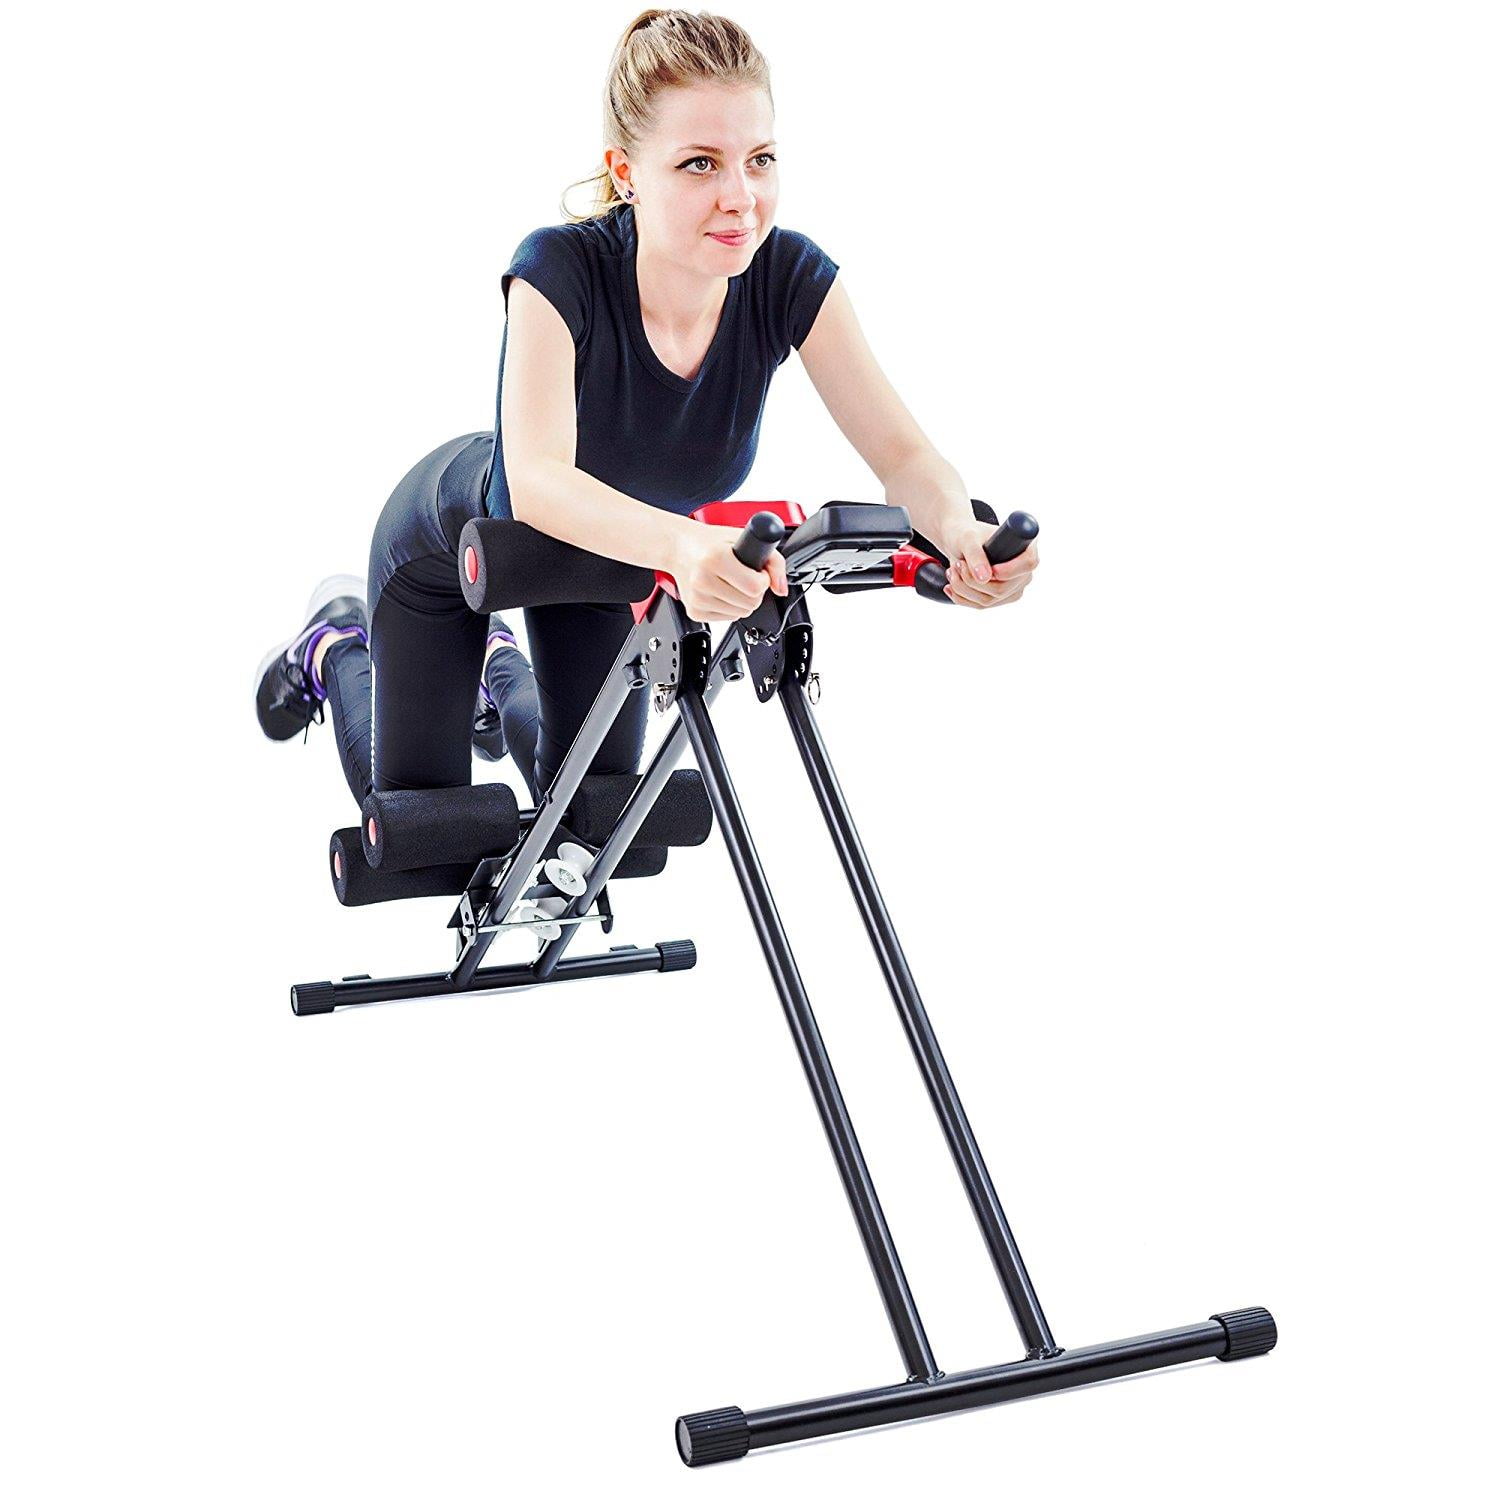 Details about   Breaststroke Abdomen Trainer Ab Roller Equipment For Home Workout Accessory 